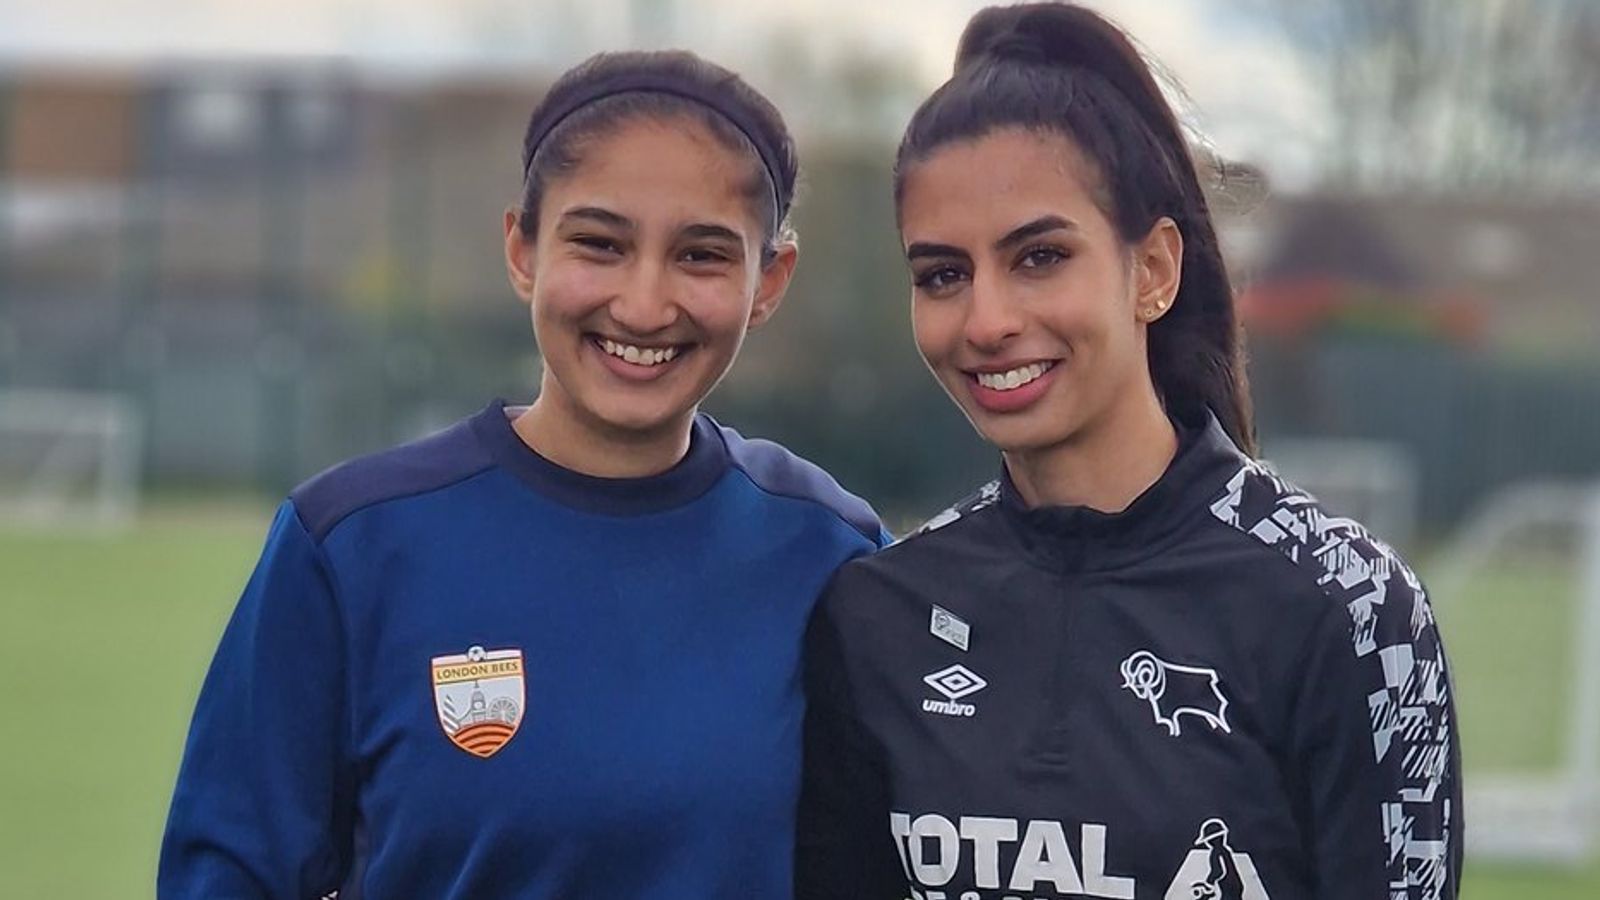 Women's football: Derby County's Kira Rai calls for action on diversity ahead of..